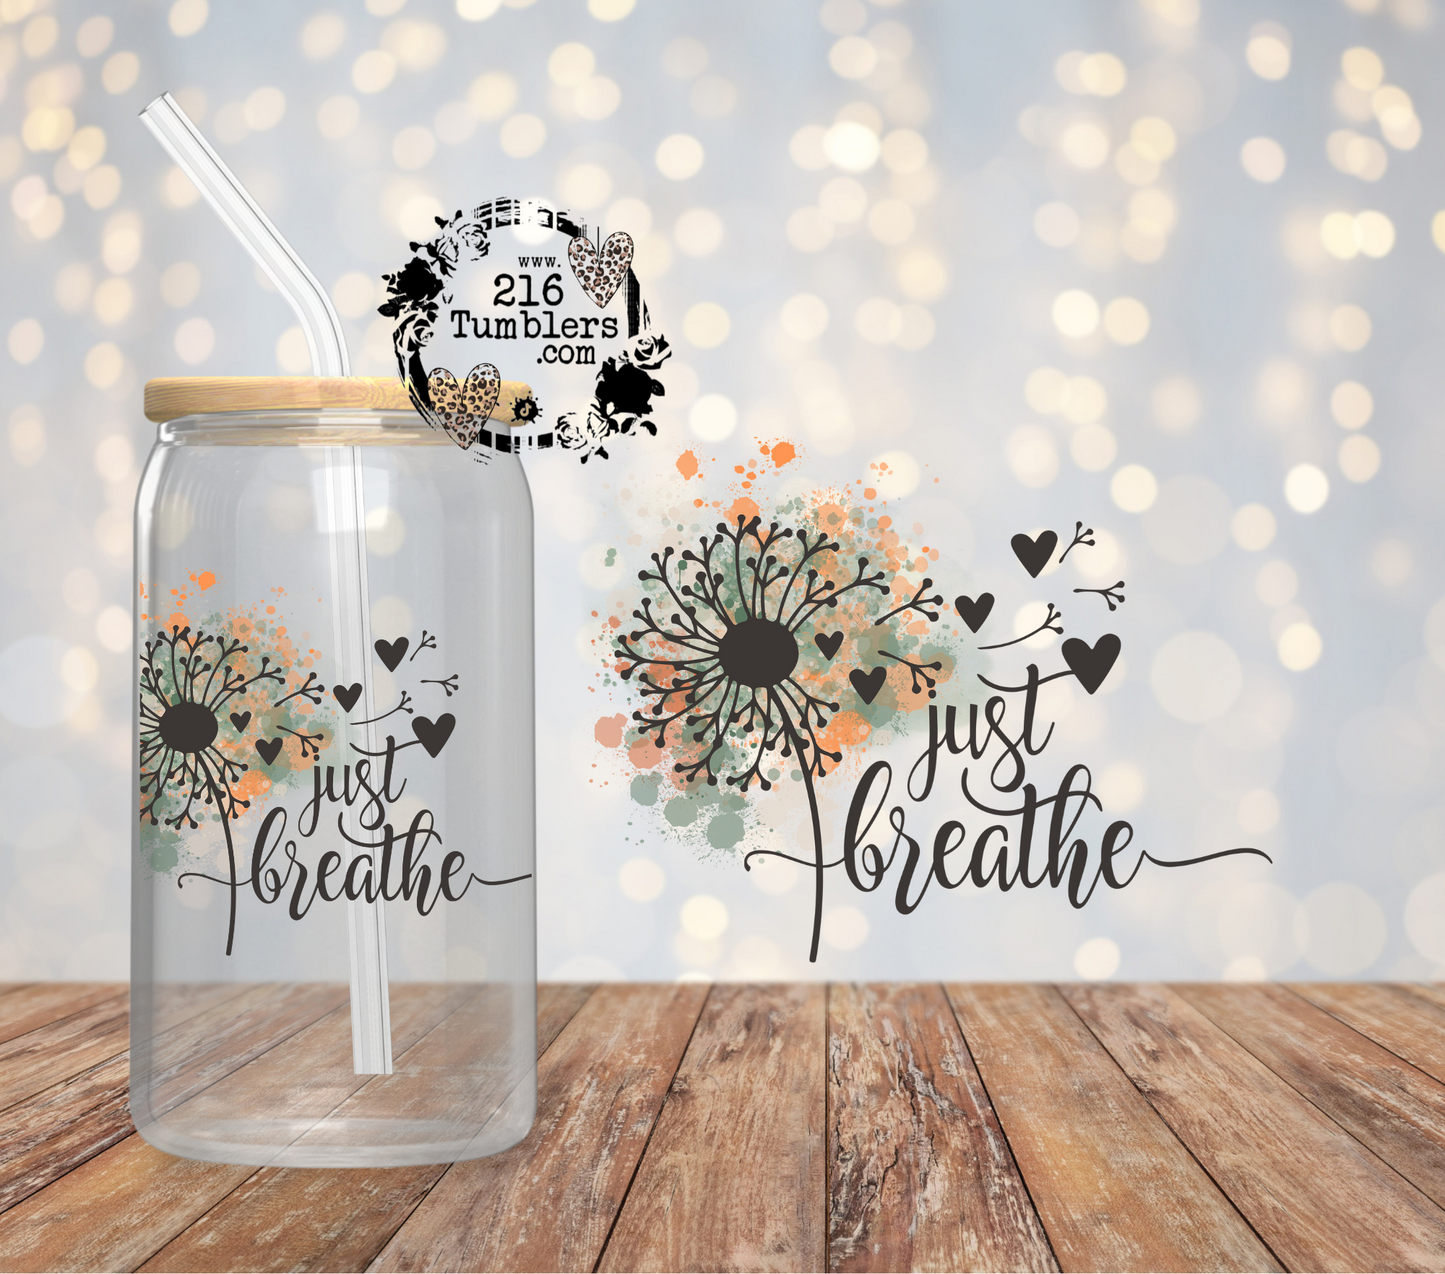 Just Breathe Decal